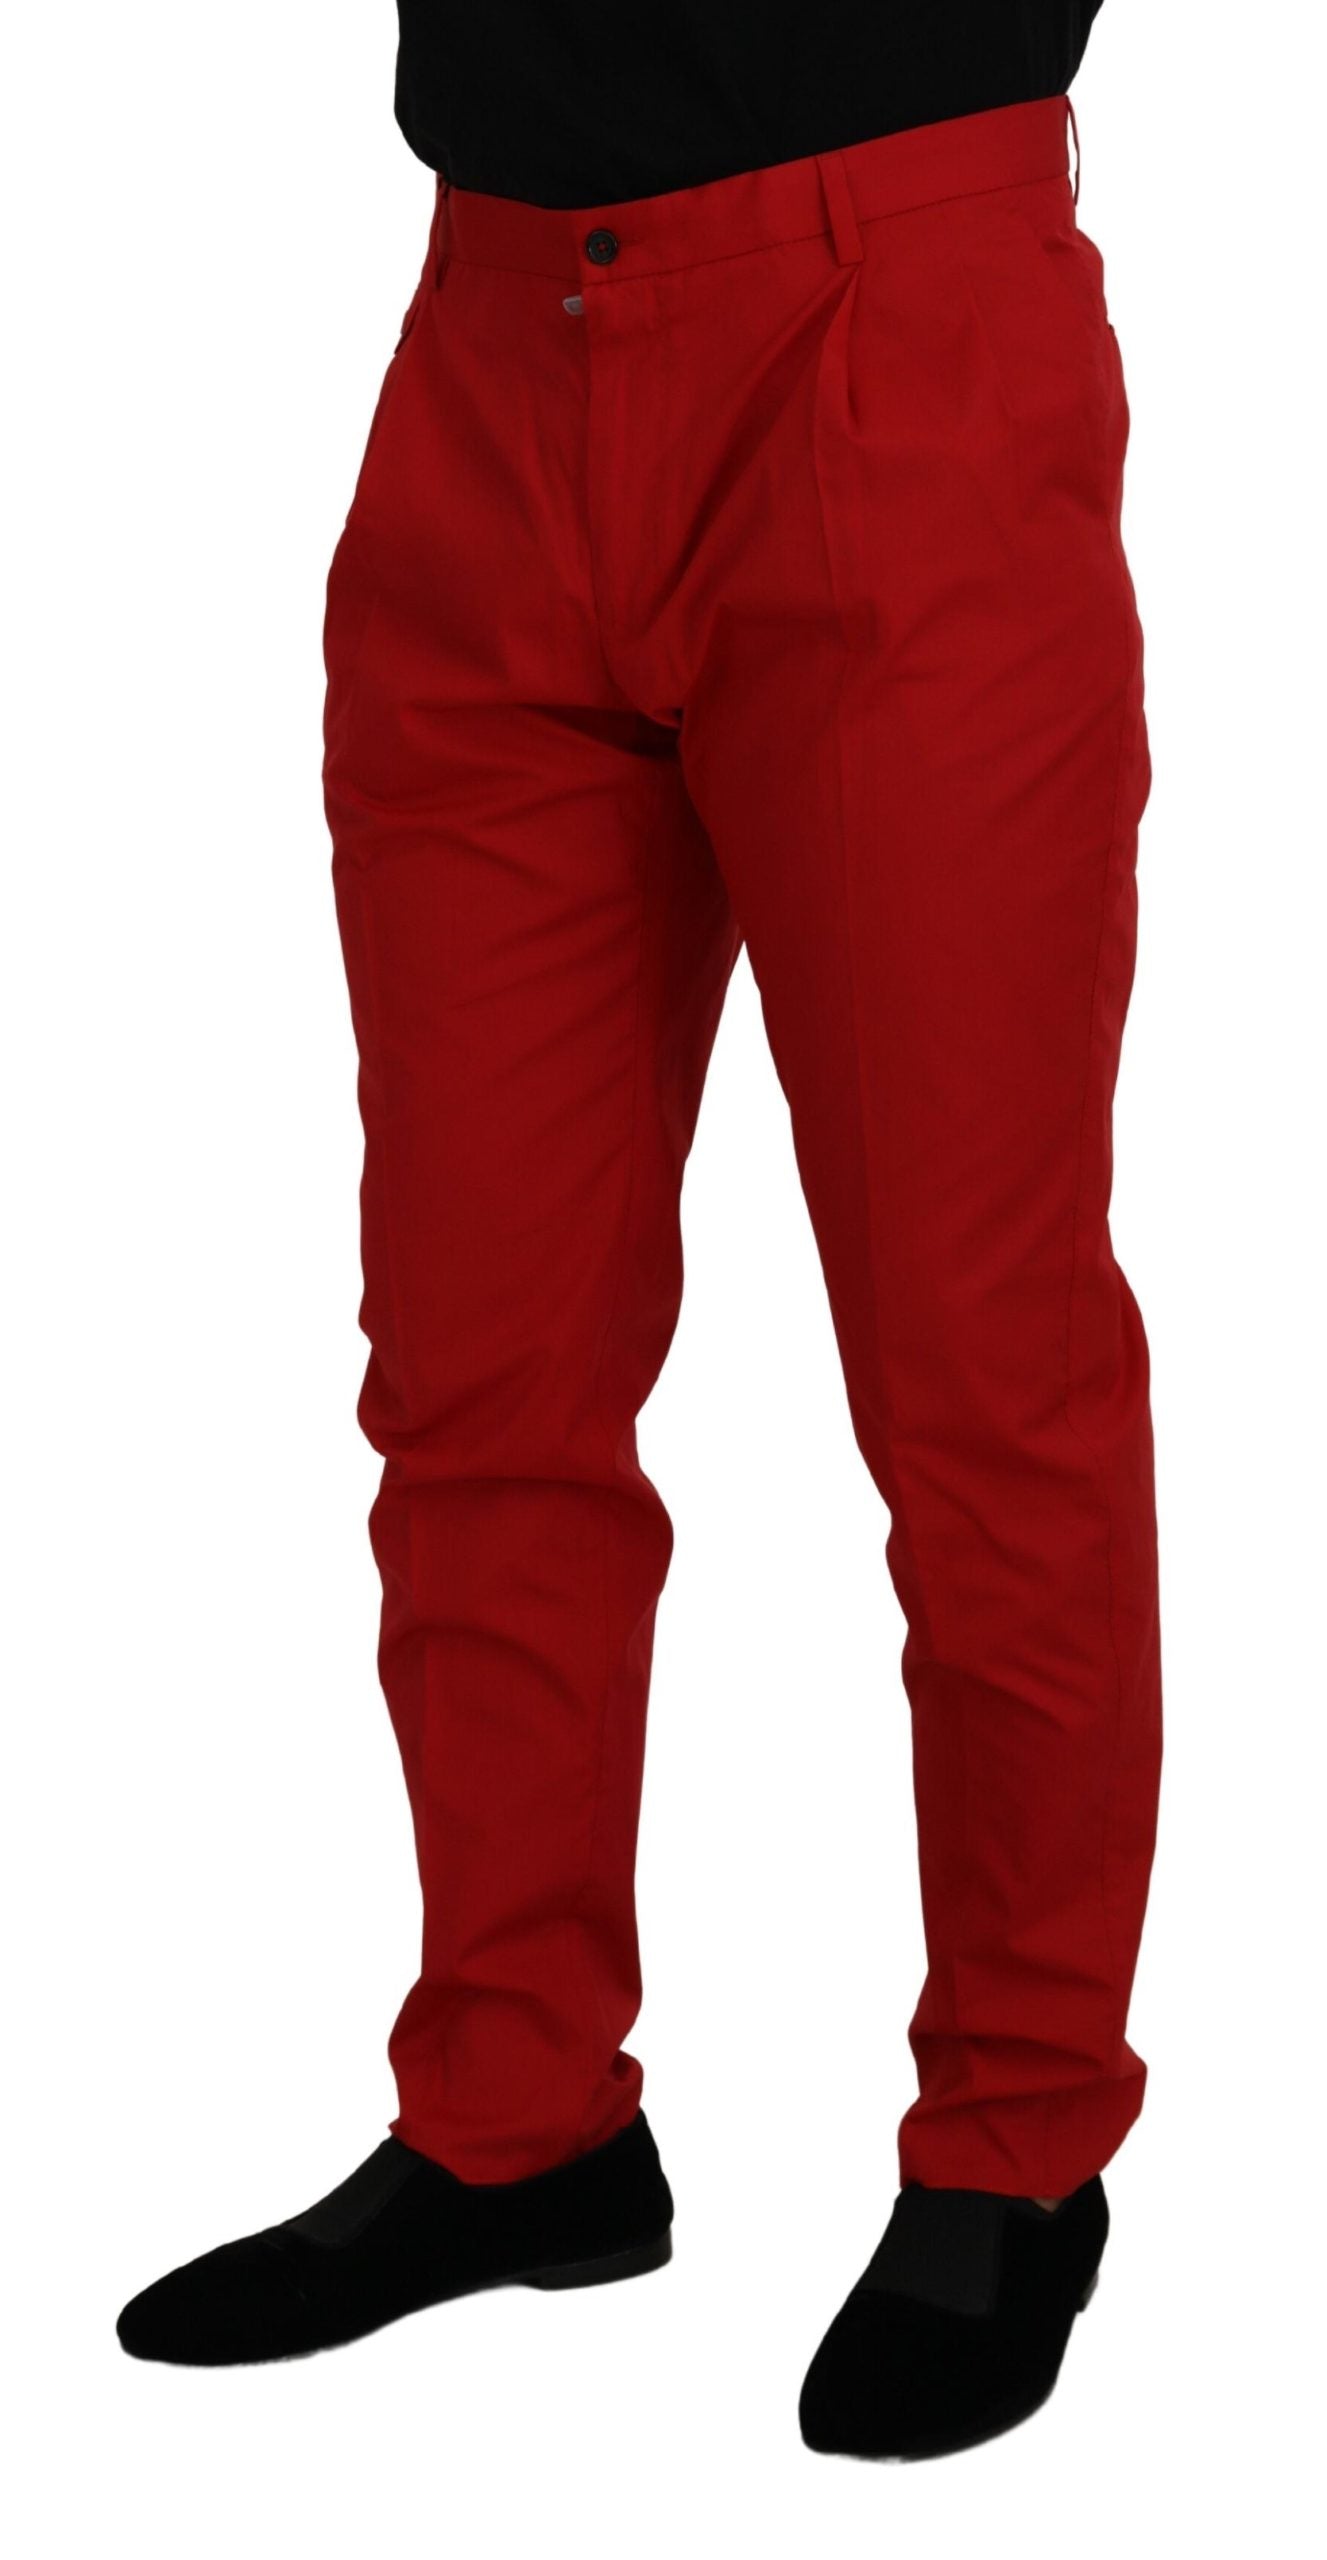 Dolce & Gabbana Red Cotton Slim Fit Trousers Chinos Pants